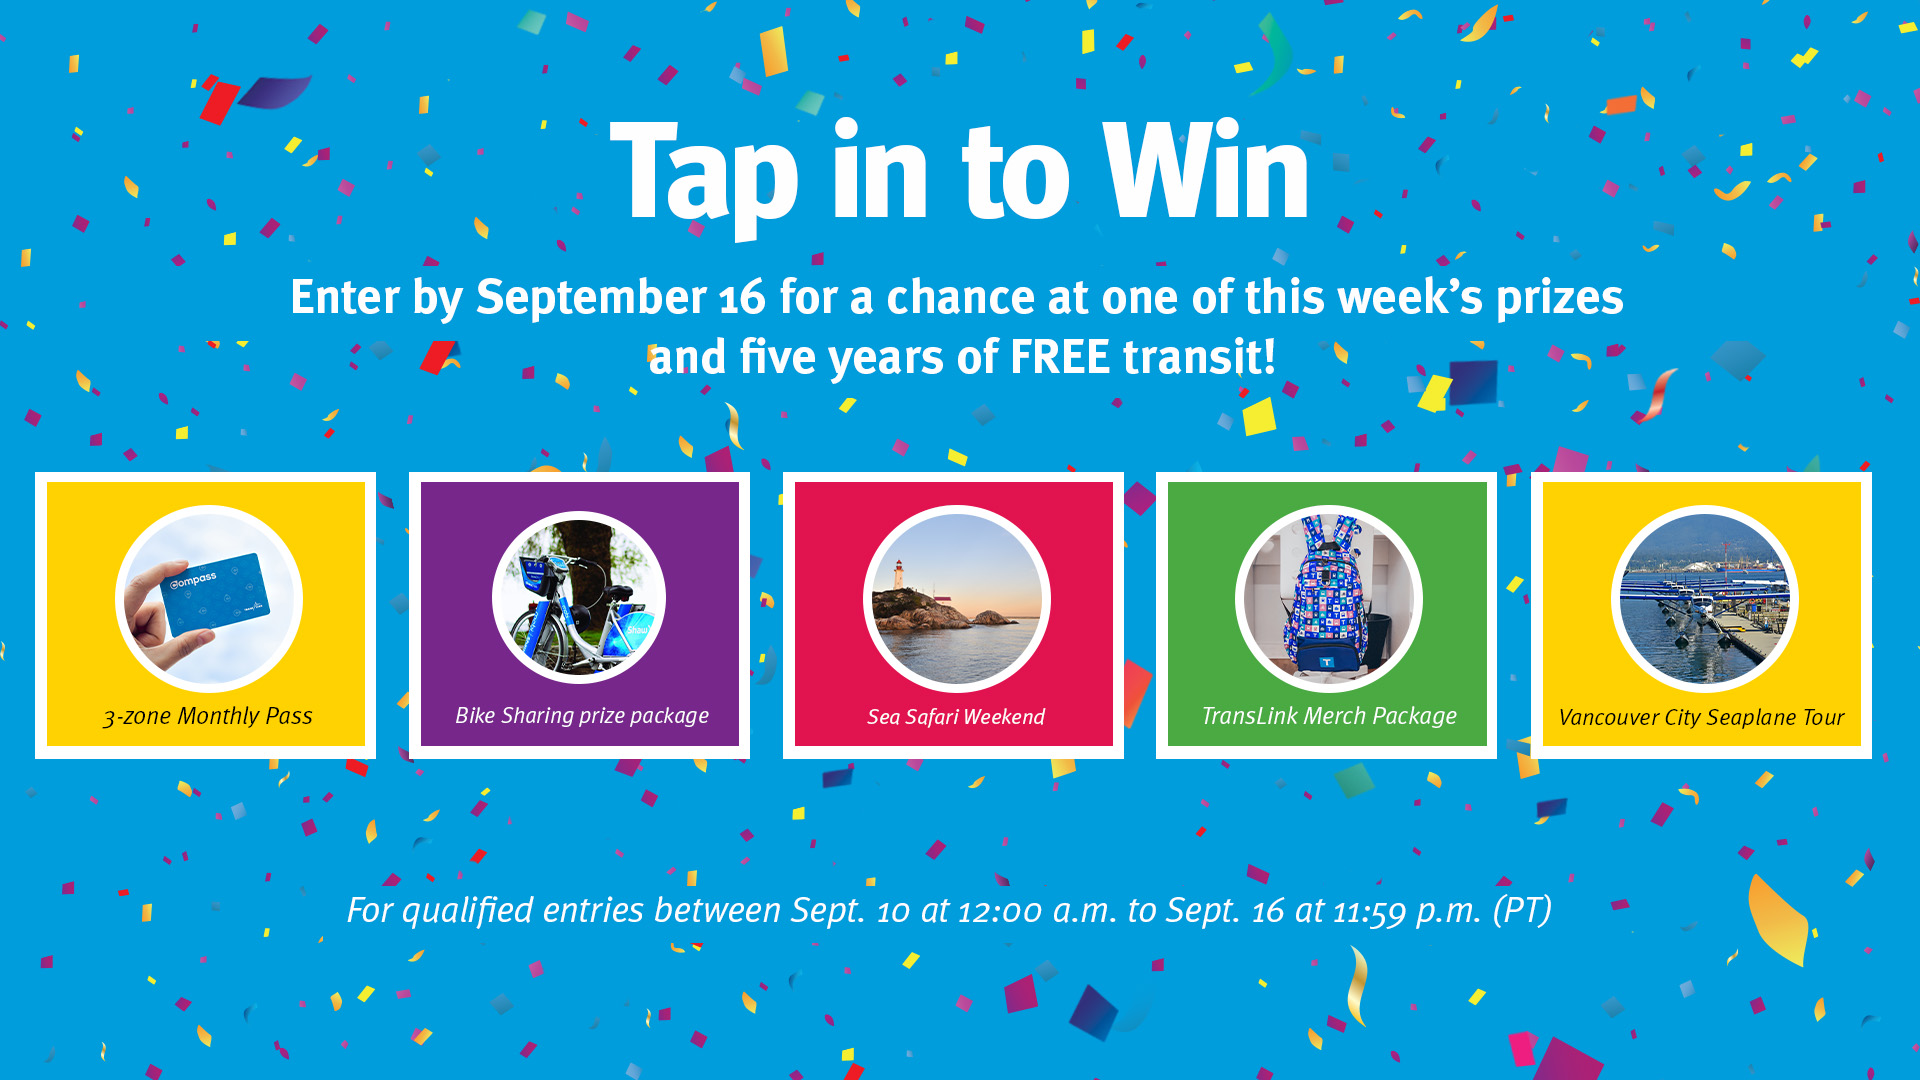 Enter Tap in to Win by Sept. 23 for a chance at one of this week's prizes: 3-zone Compass Monthly Pass, Vancouver Whitecaps prize package, Tasty Tour Weekend in Langley Stay and Play package, and transit merch.